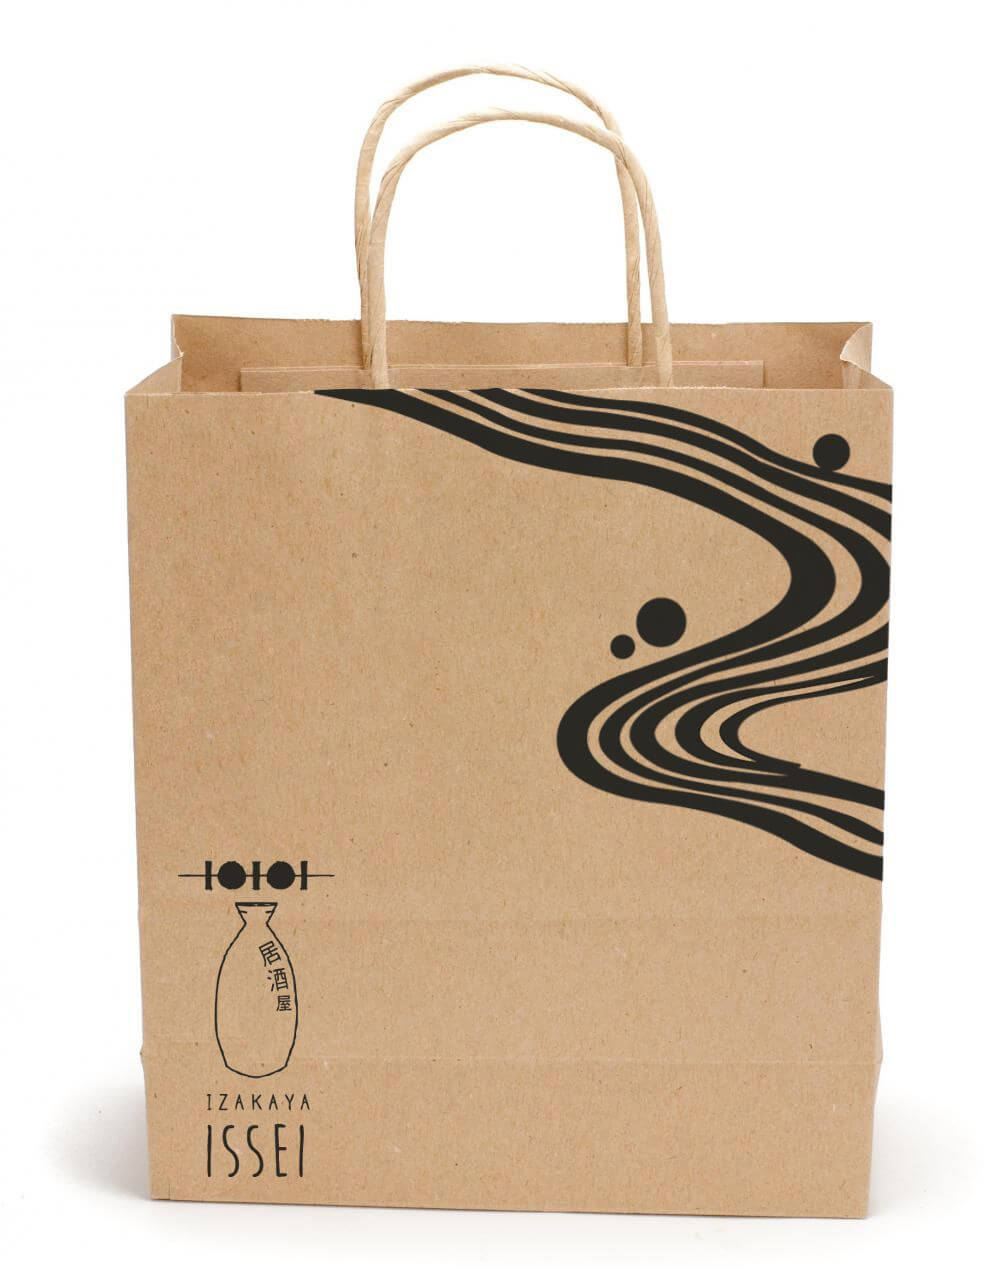 Where to Get Custom Printed Tote Bags With a Logo in Miami?